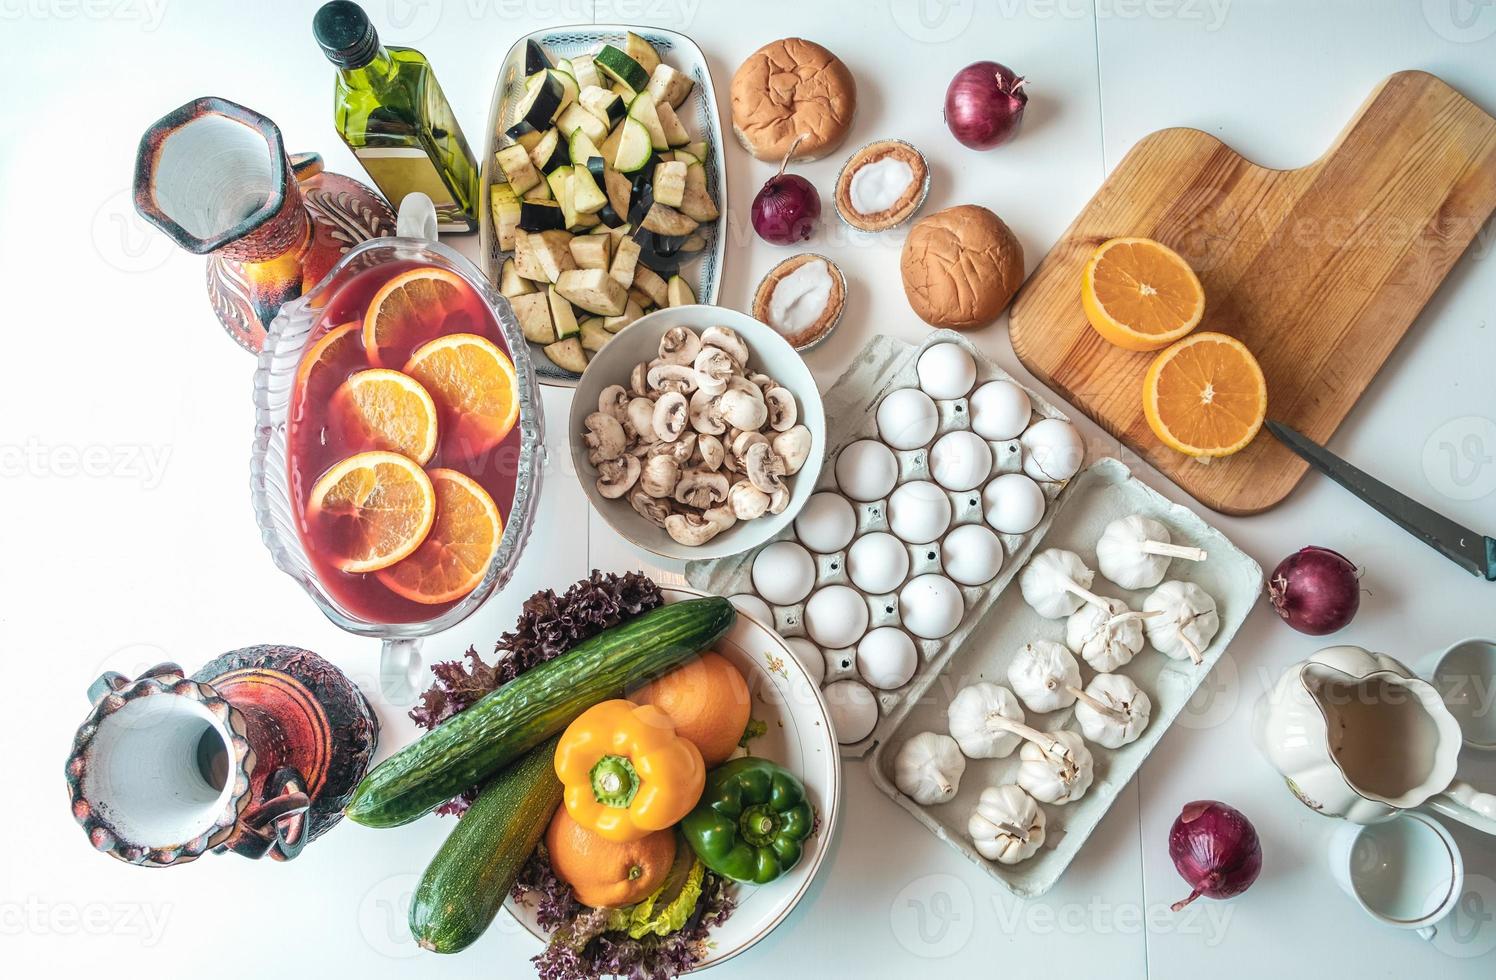 Top view, Ingredient food with vegetables and fruits and kitchenware on table photo